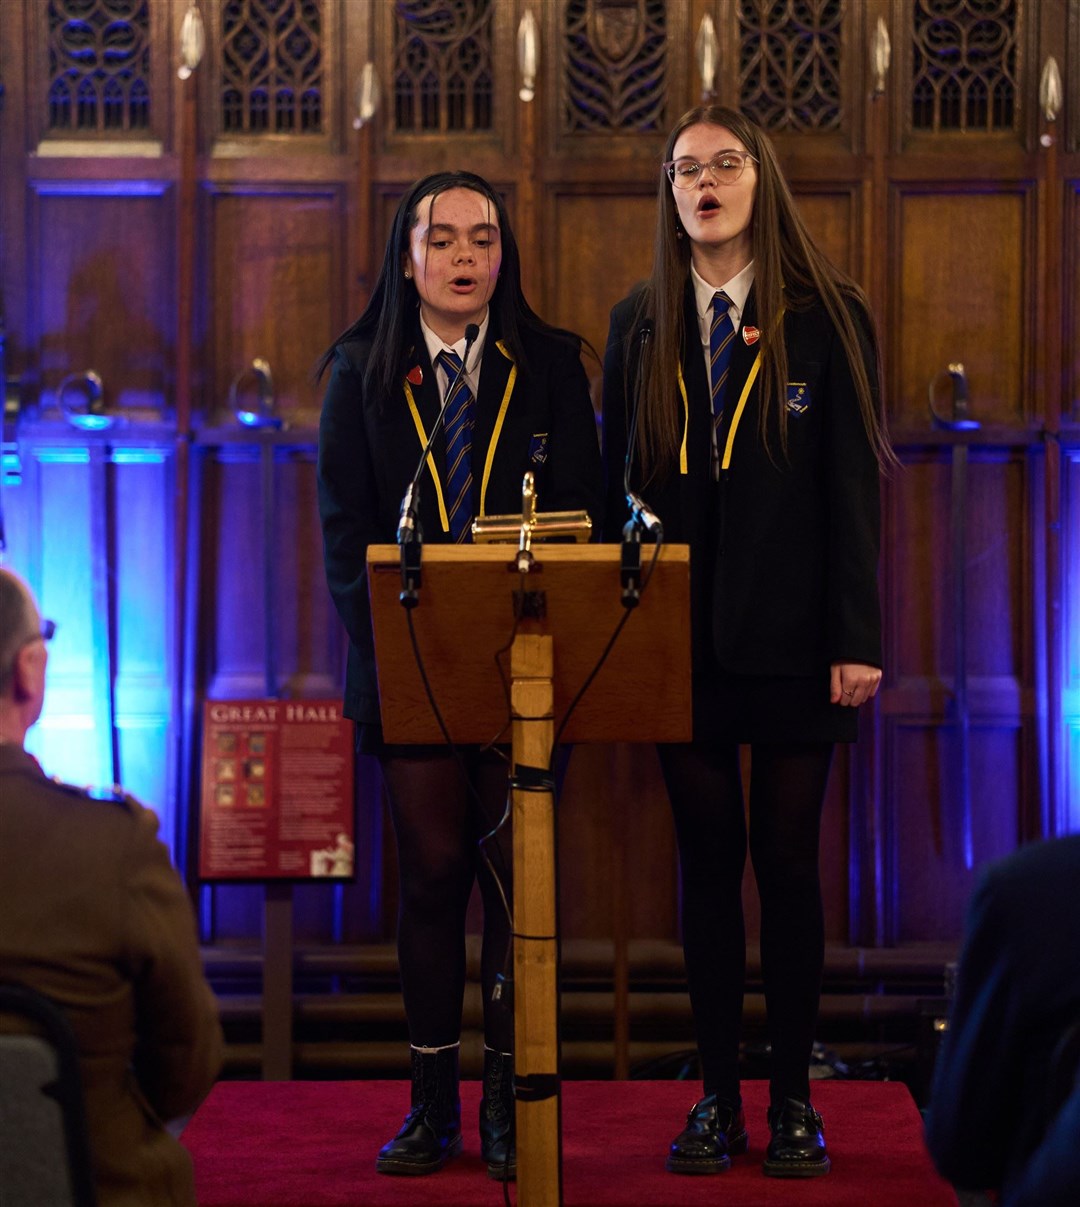 Lossiemouth High School pupils Lily Gilmour and Rhianna Williams singing on stage.